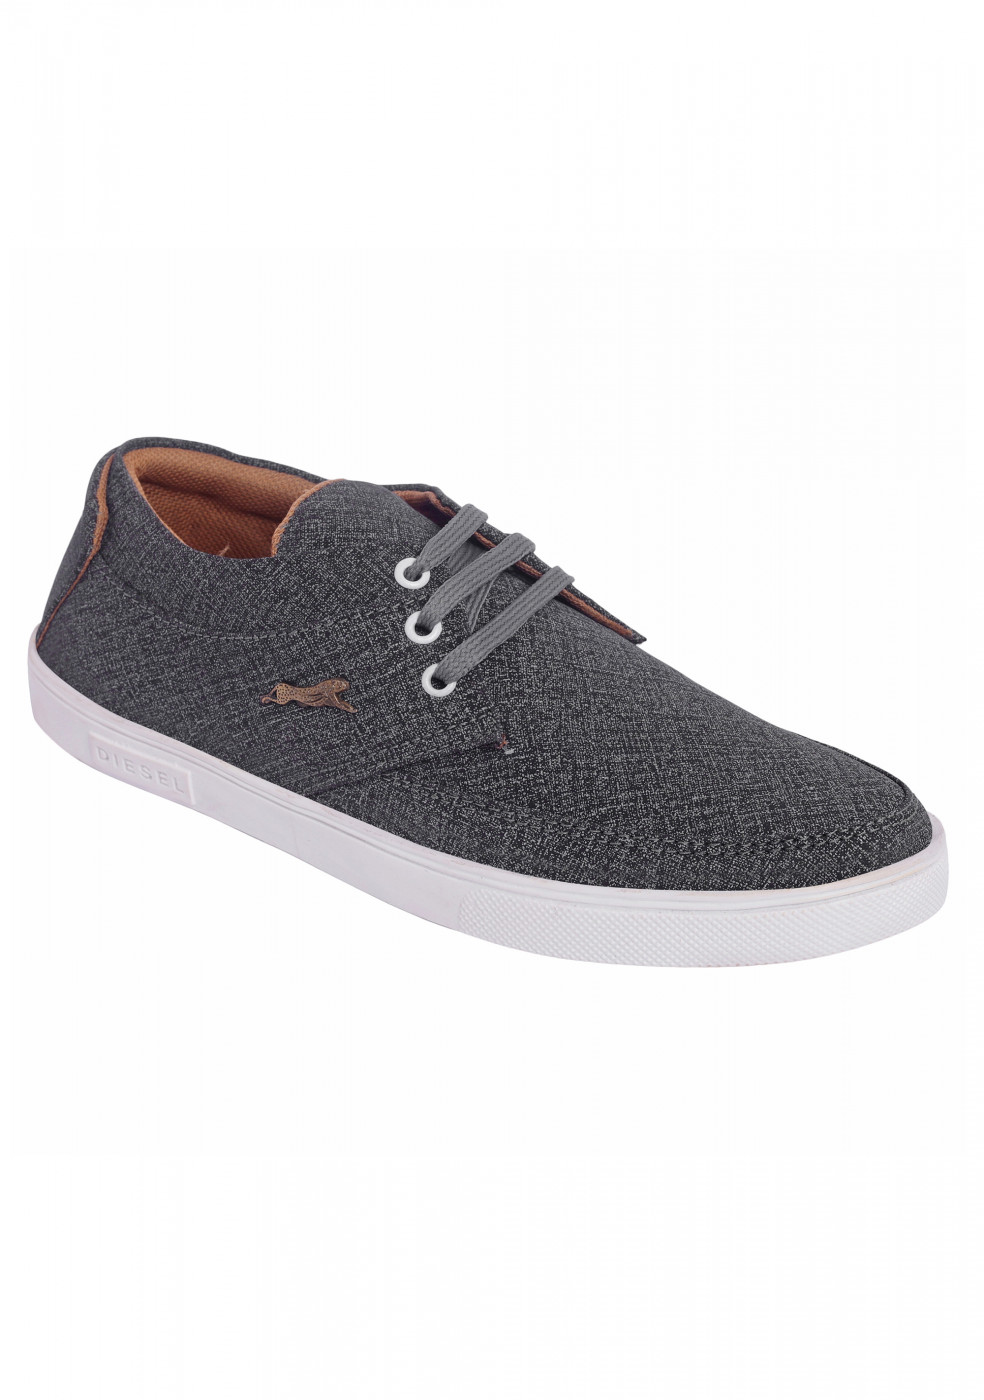 PERFECT Light Gray Sneakers For Men